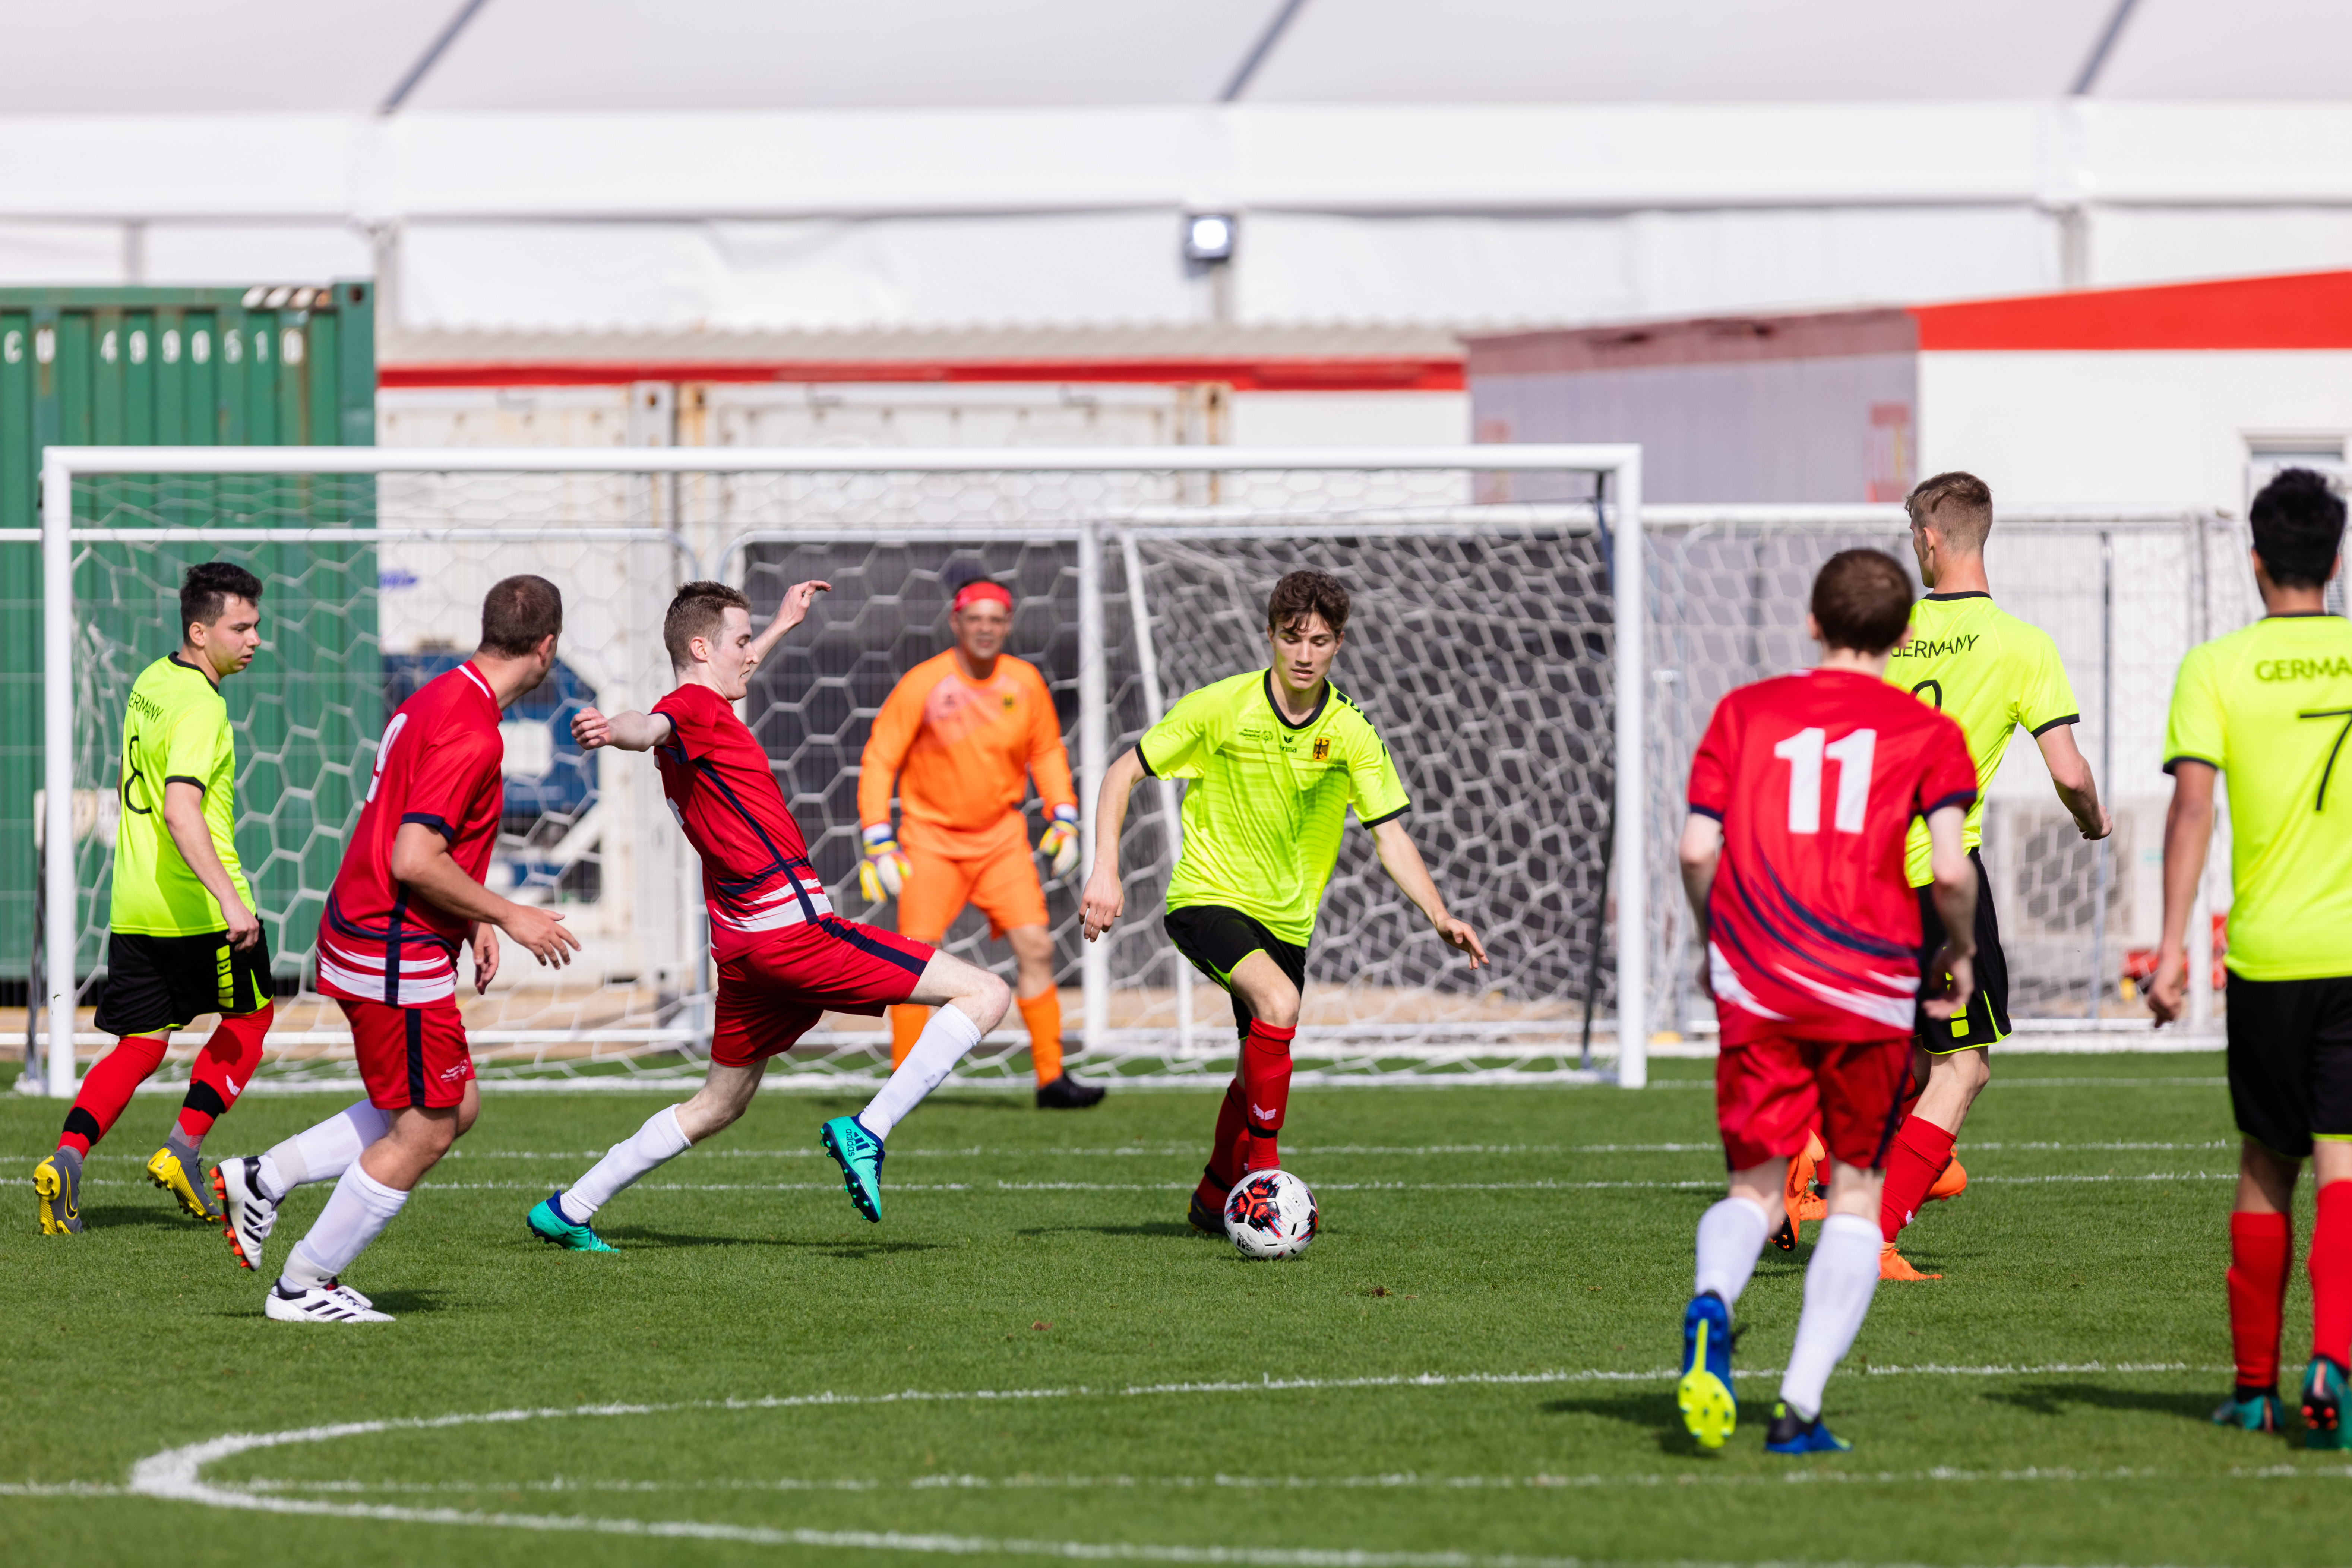 Special Olympics Great Britain and Special Olympics Germany play in a seven-a-side group match at the World Games